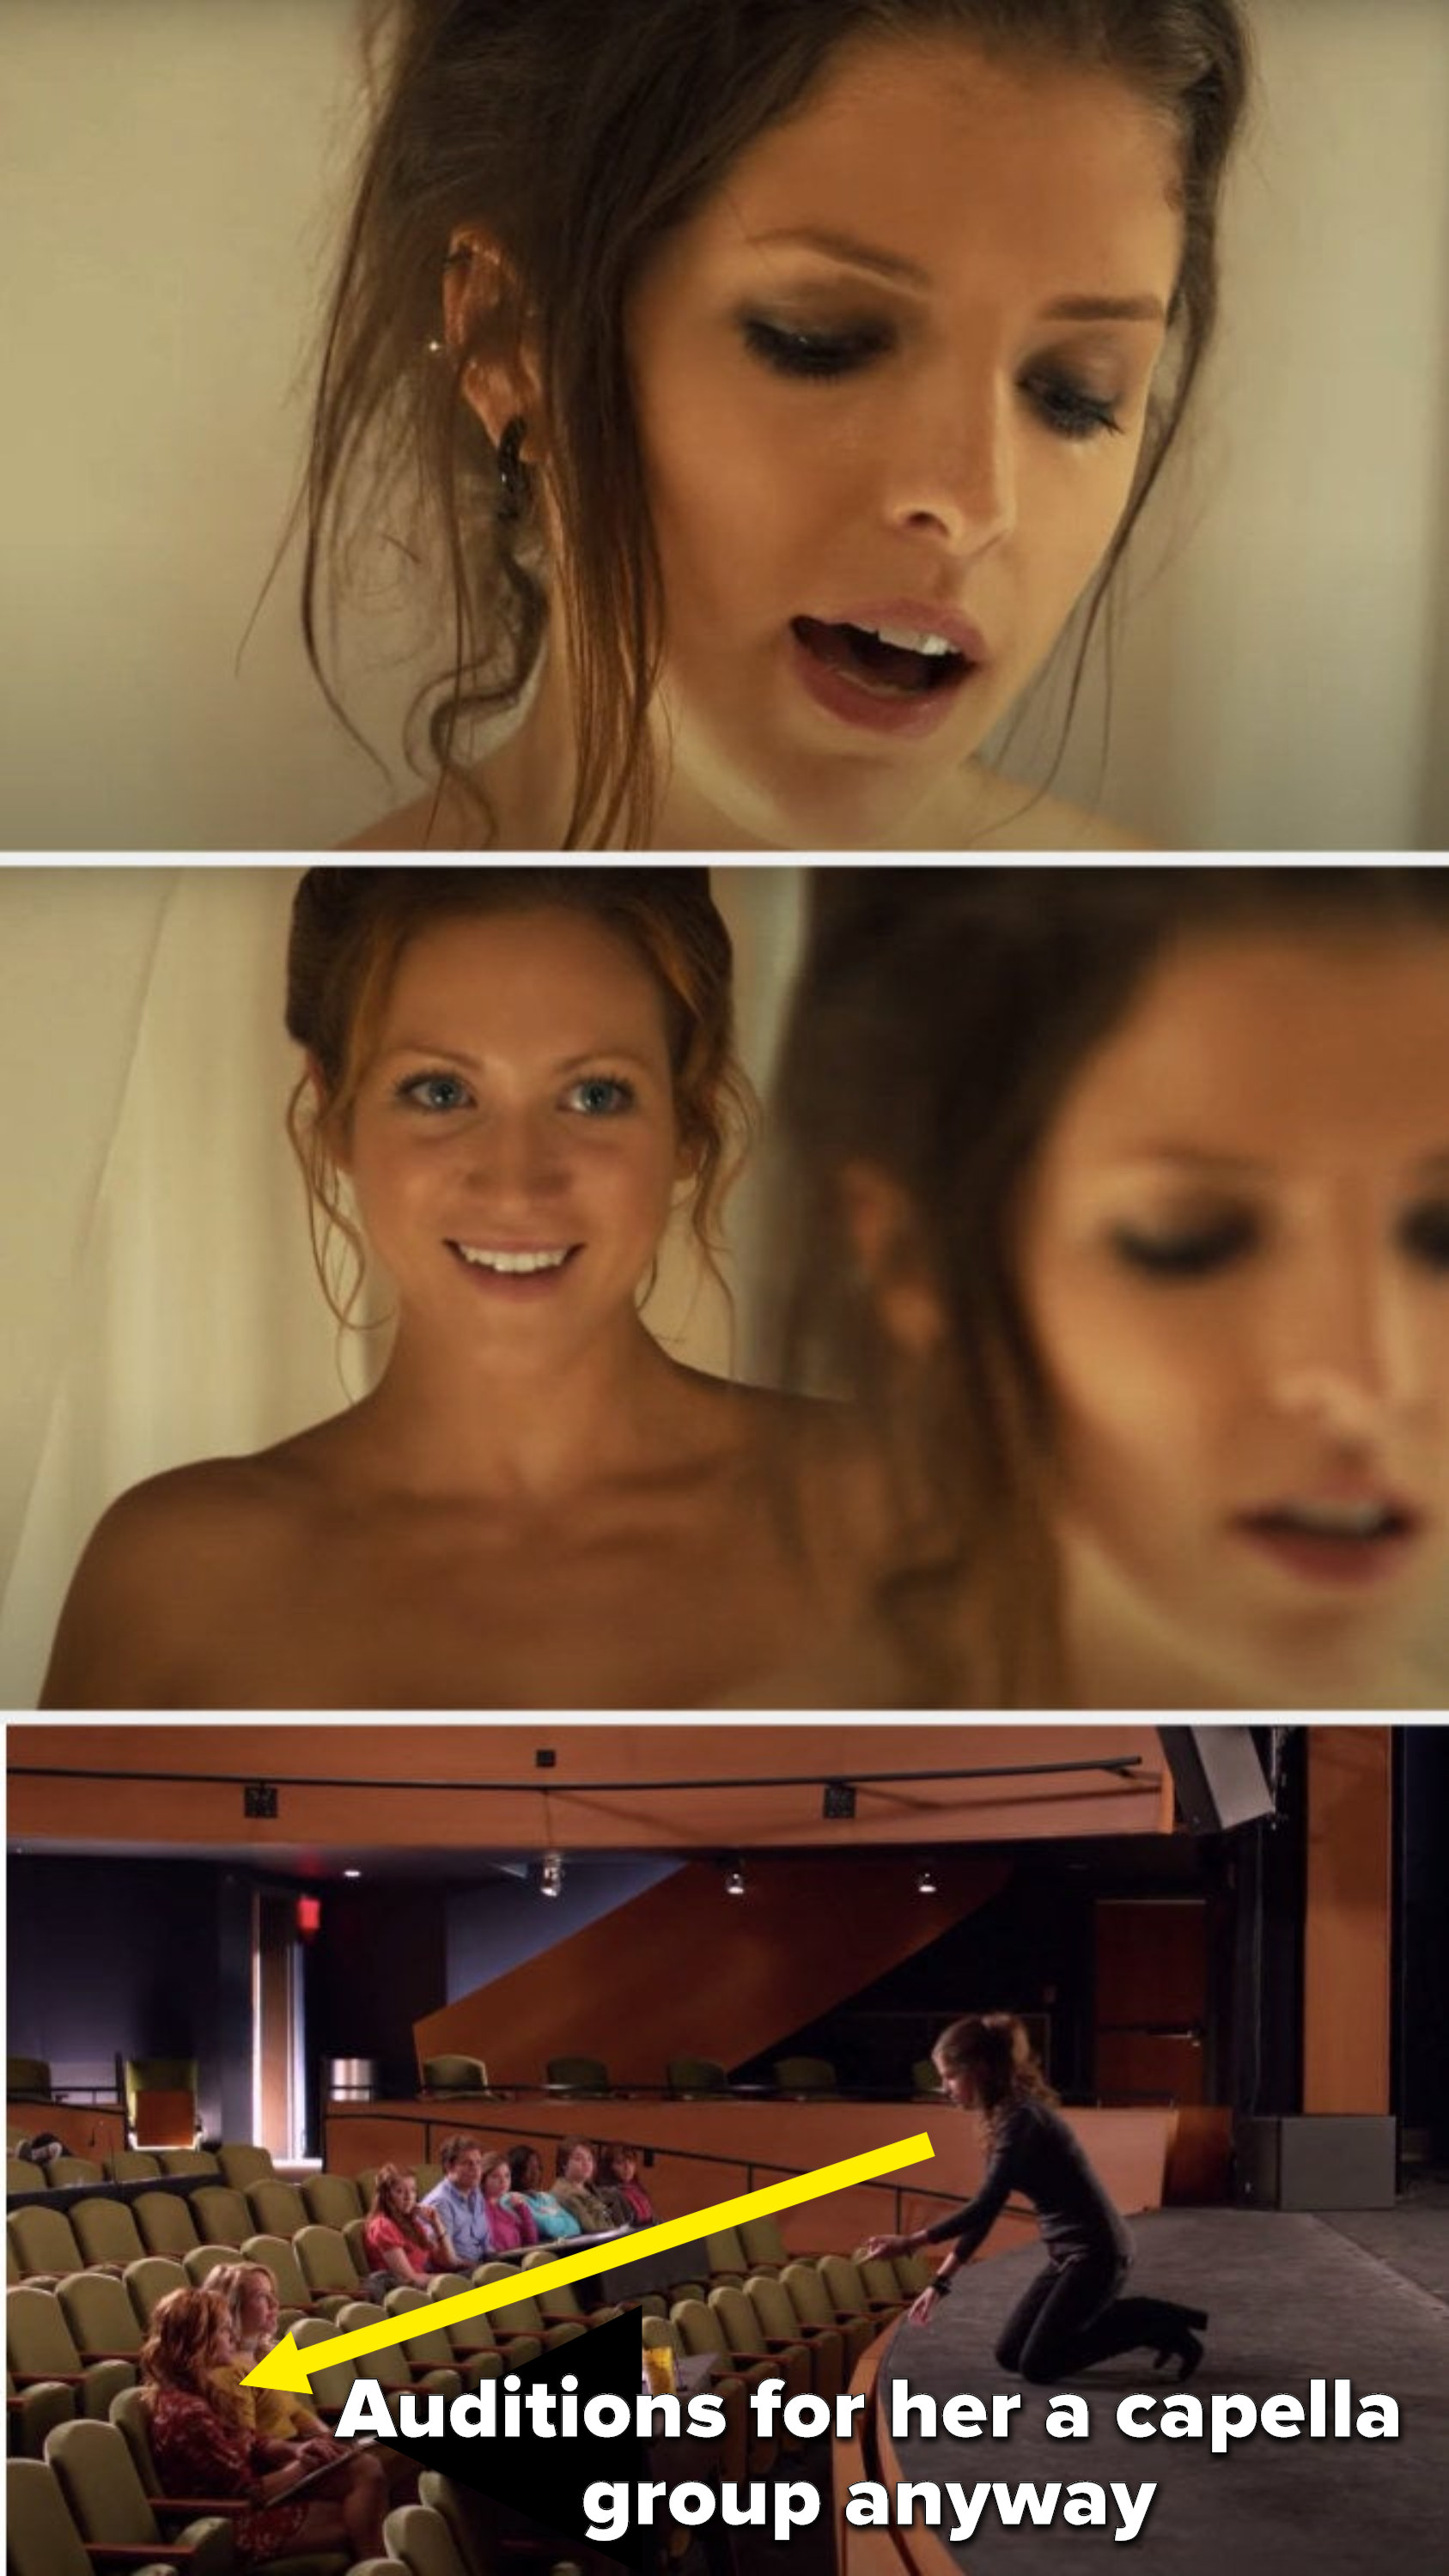 Chloe sneaks up on Beca in the shower, but Beca auditions for Chloe&#x27;s a capella group anyway